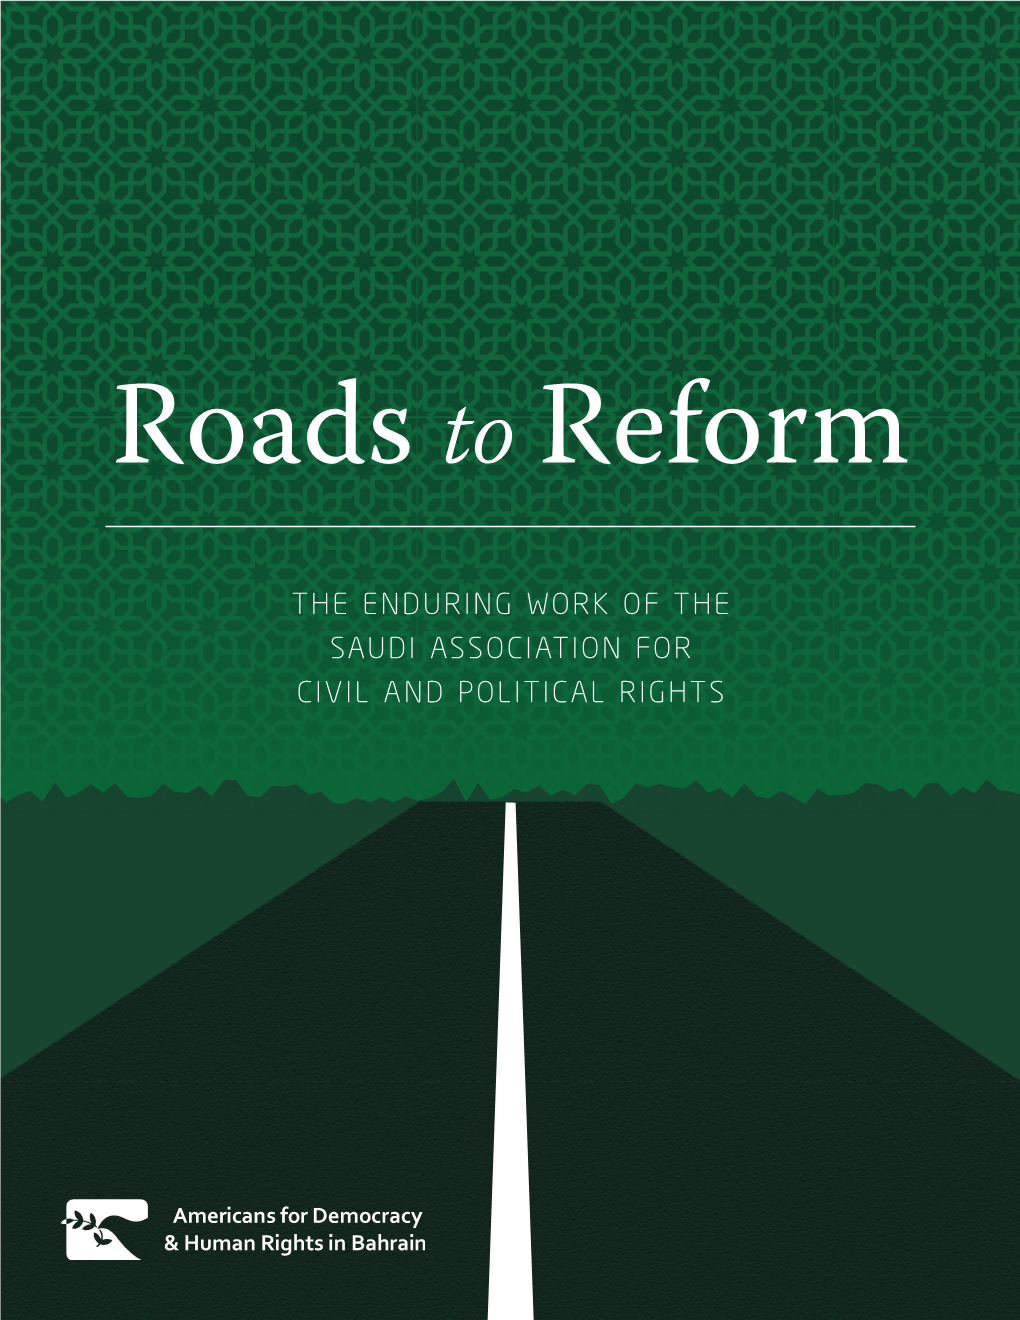 Roads to Reform: the Enduring Work of the Saudi Association for Civil and Political Rights